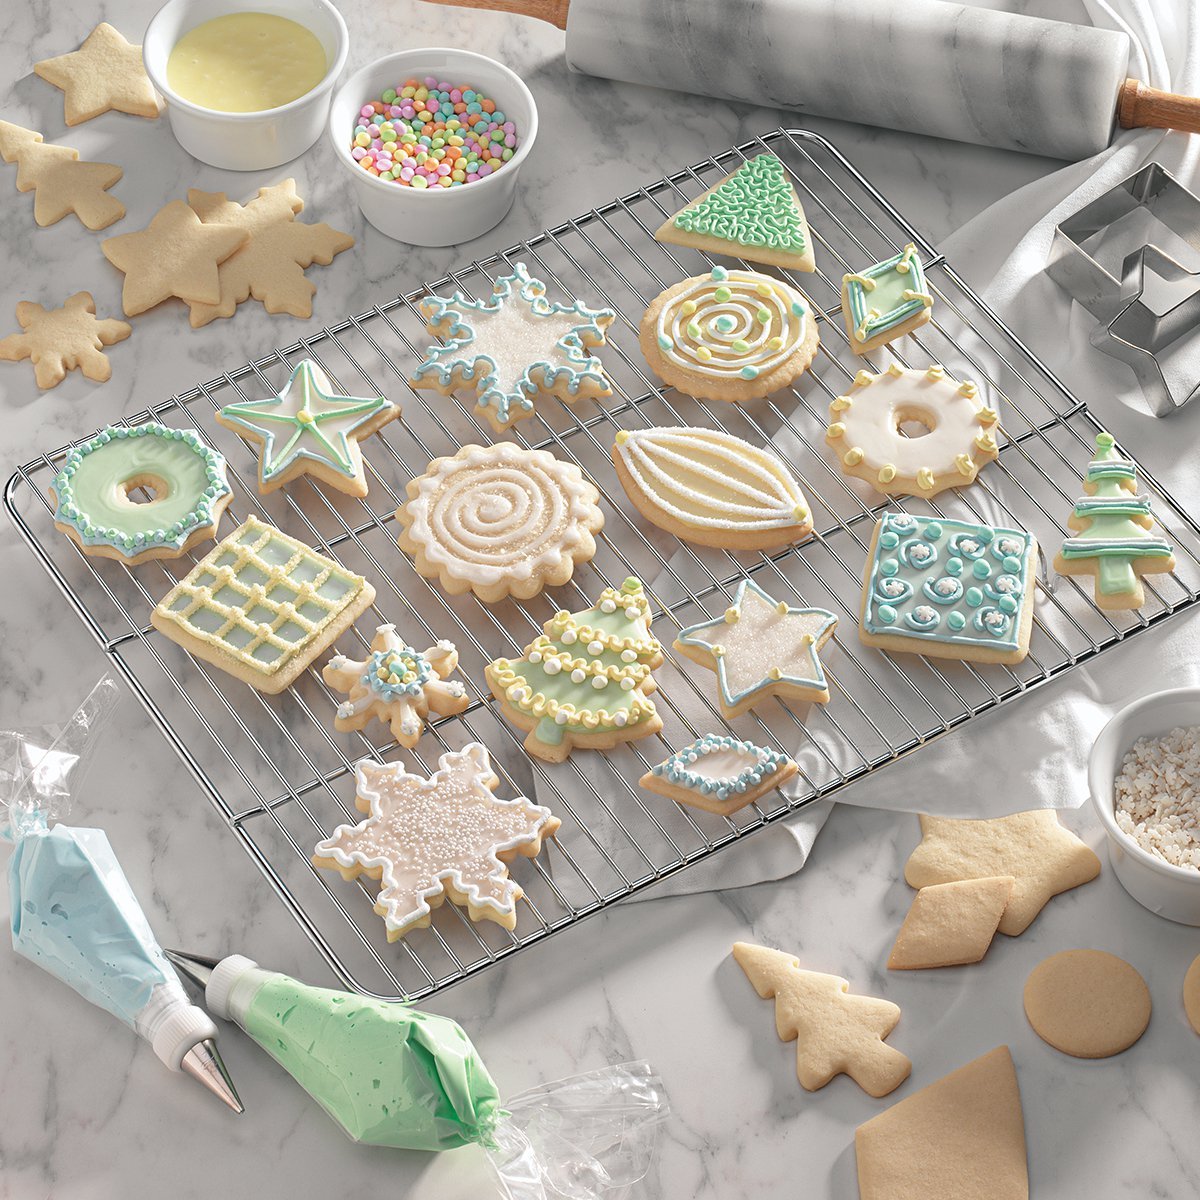 9 Easy Christmas Cookie Decorating Ideas